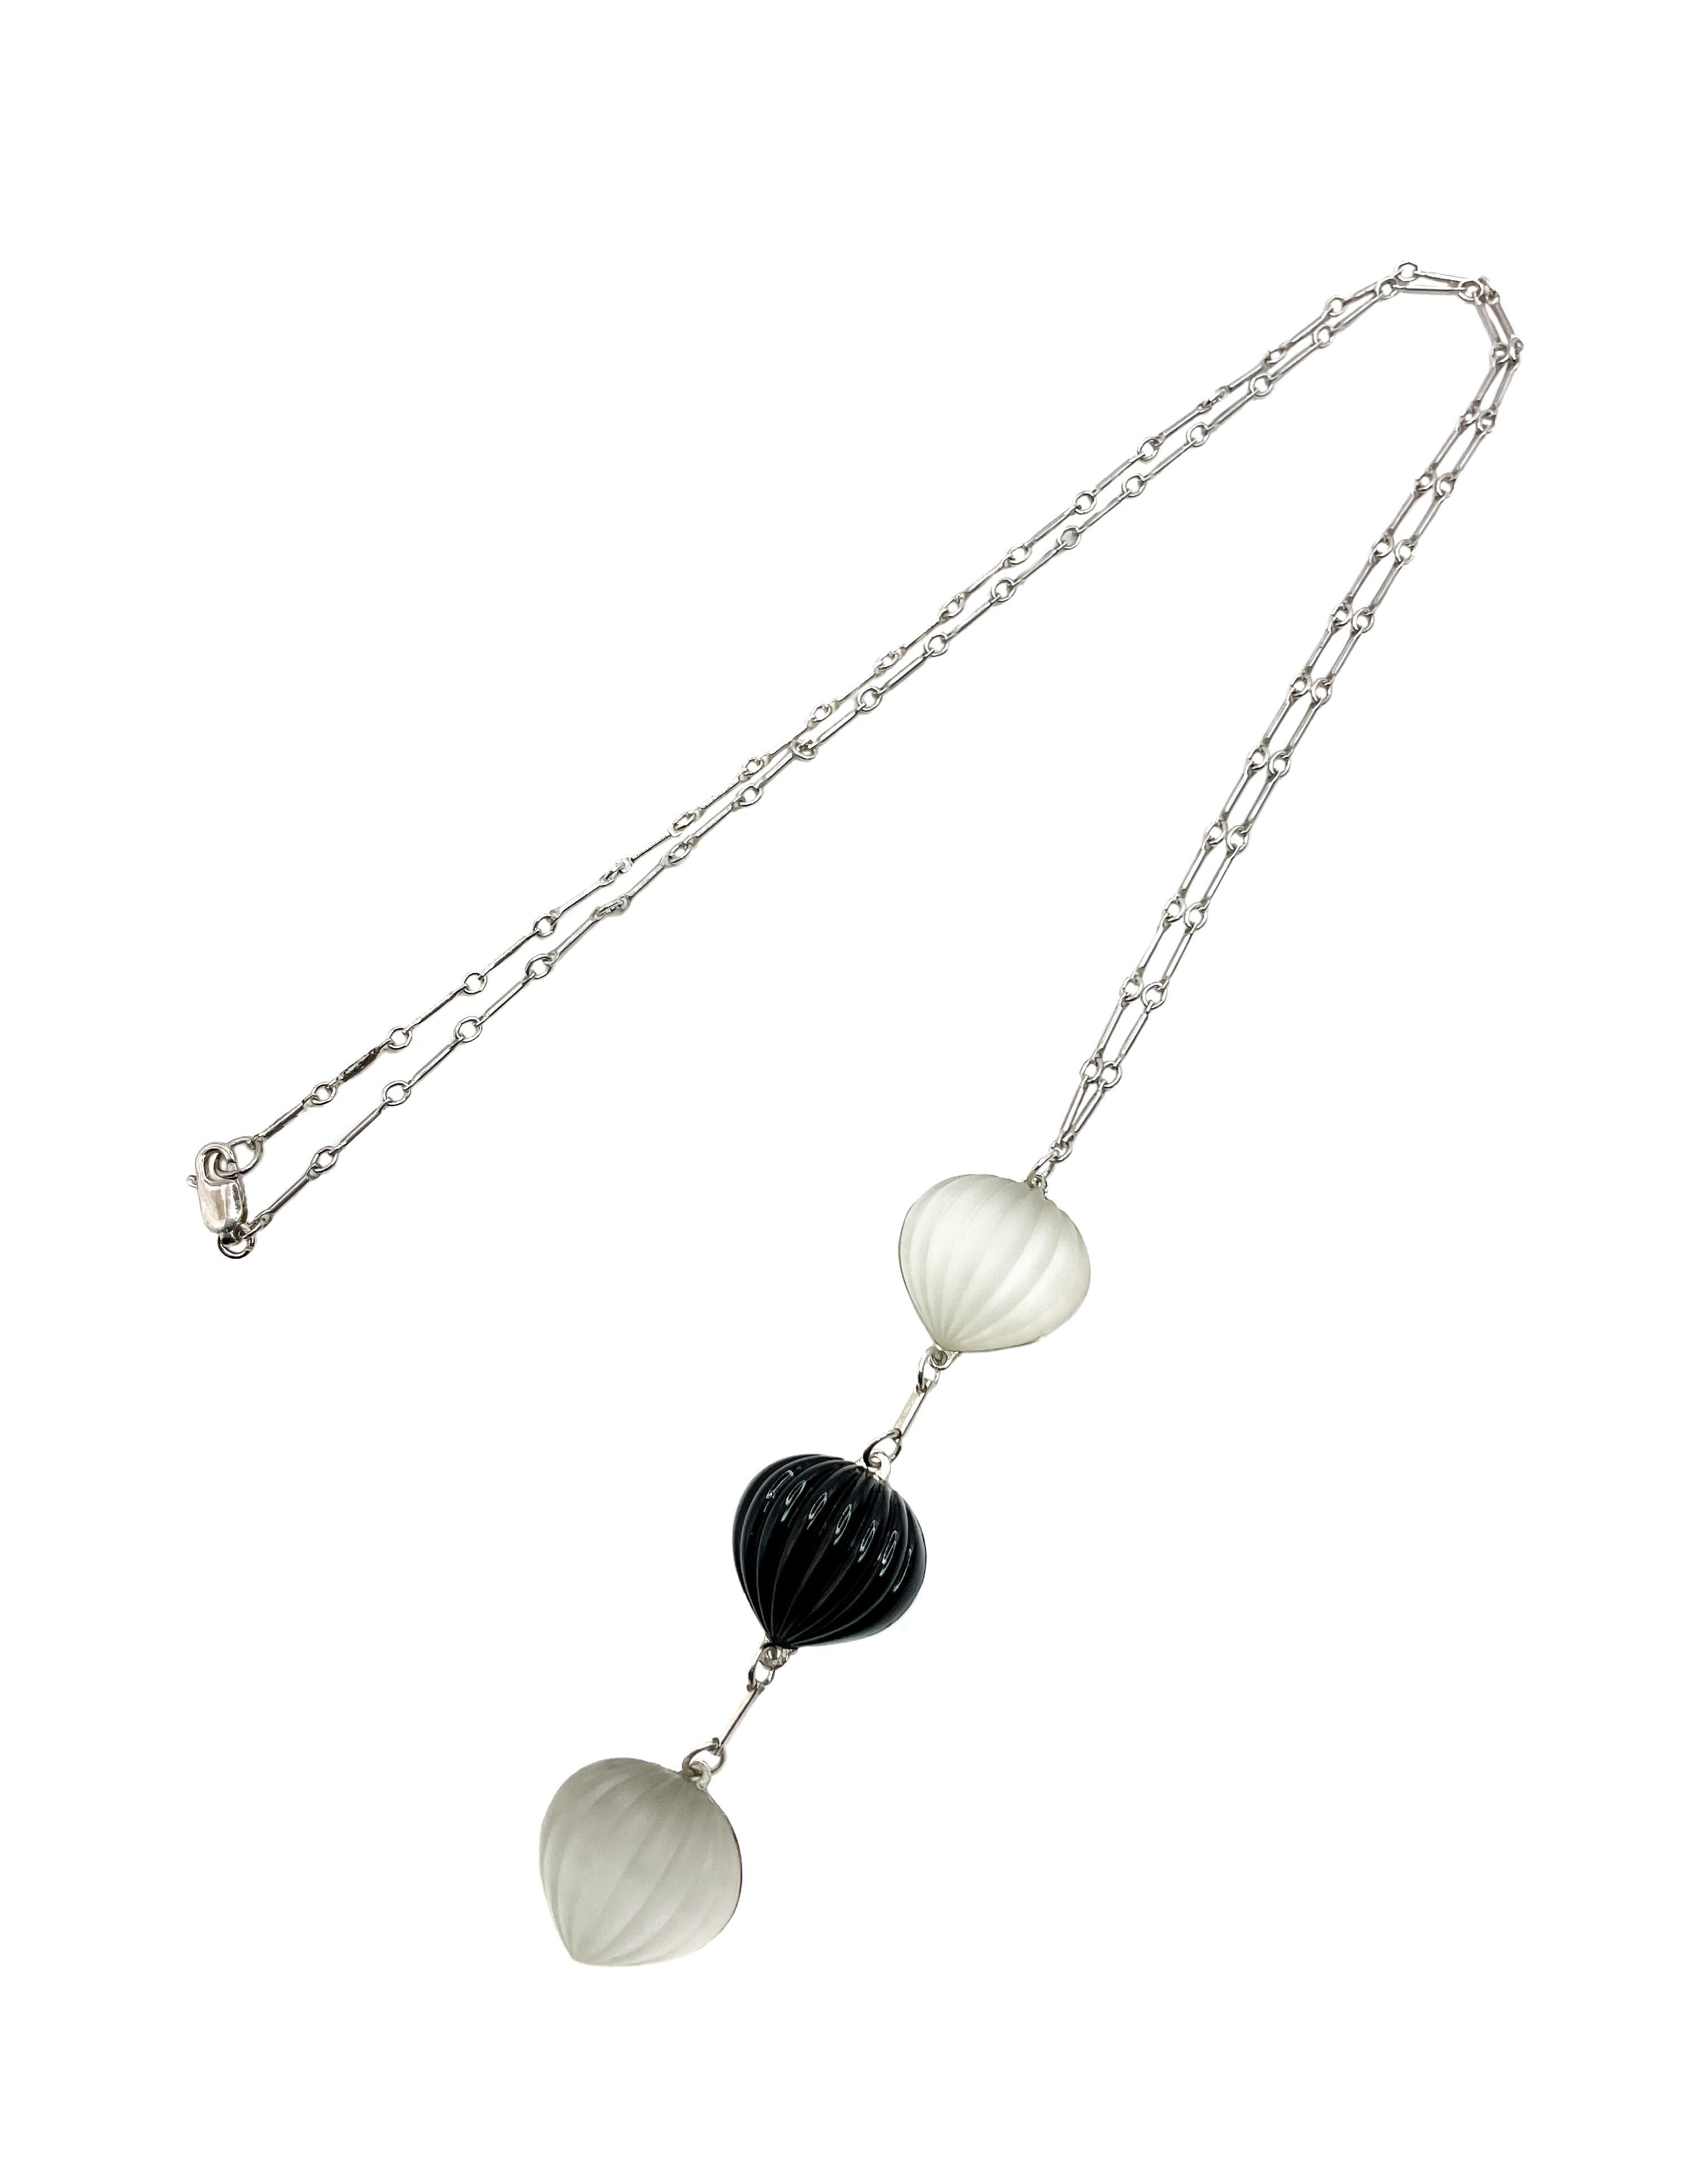 This elegant Y-necklace features three ribbed briollette glass pendants. They are lined with sterling silver and separated by chain in a drop style. The vintage glass is from Czech Republic. Two of the broillette drops are frosted clear, separated